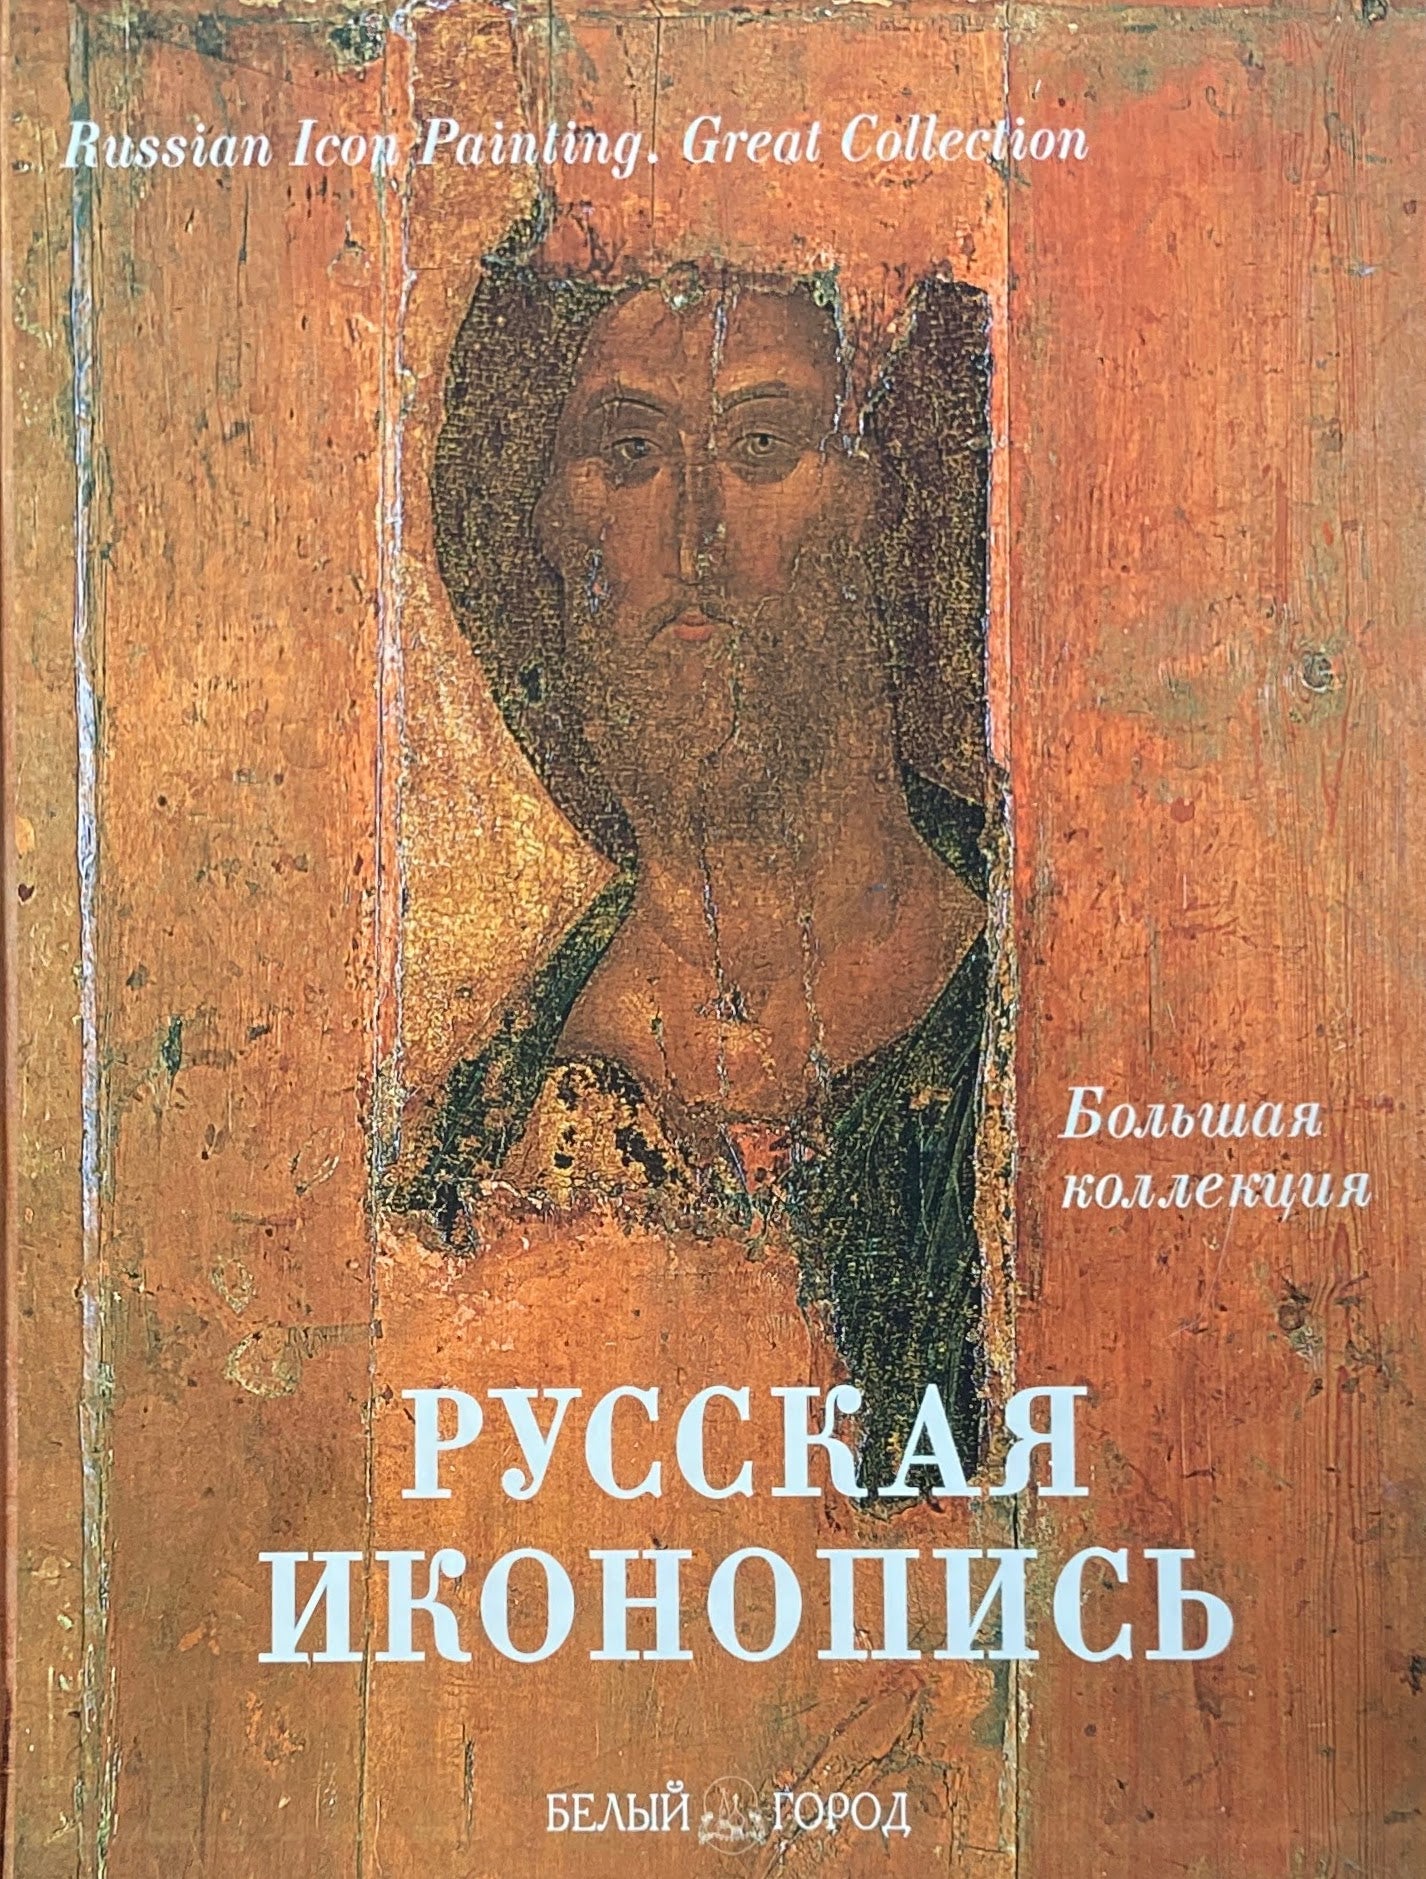 Russian Icon Painting 　Great Collection　Evgenii Troubetzkoy